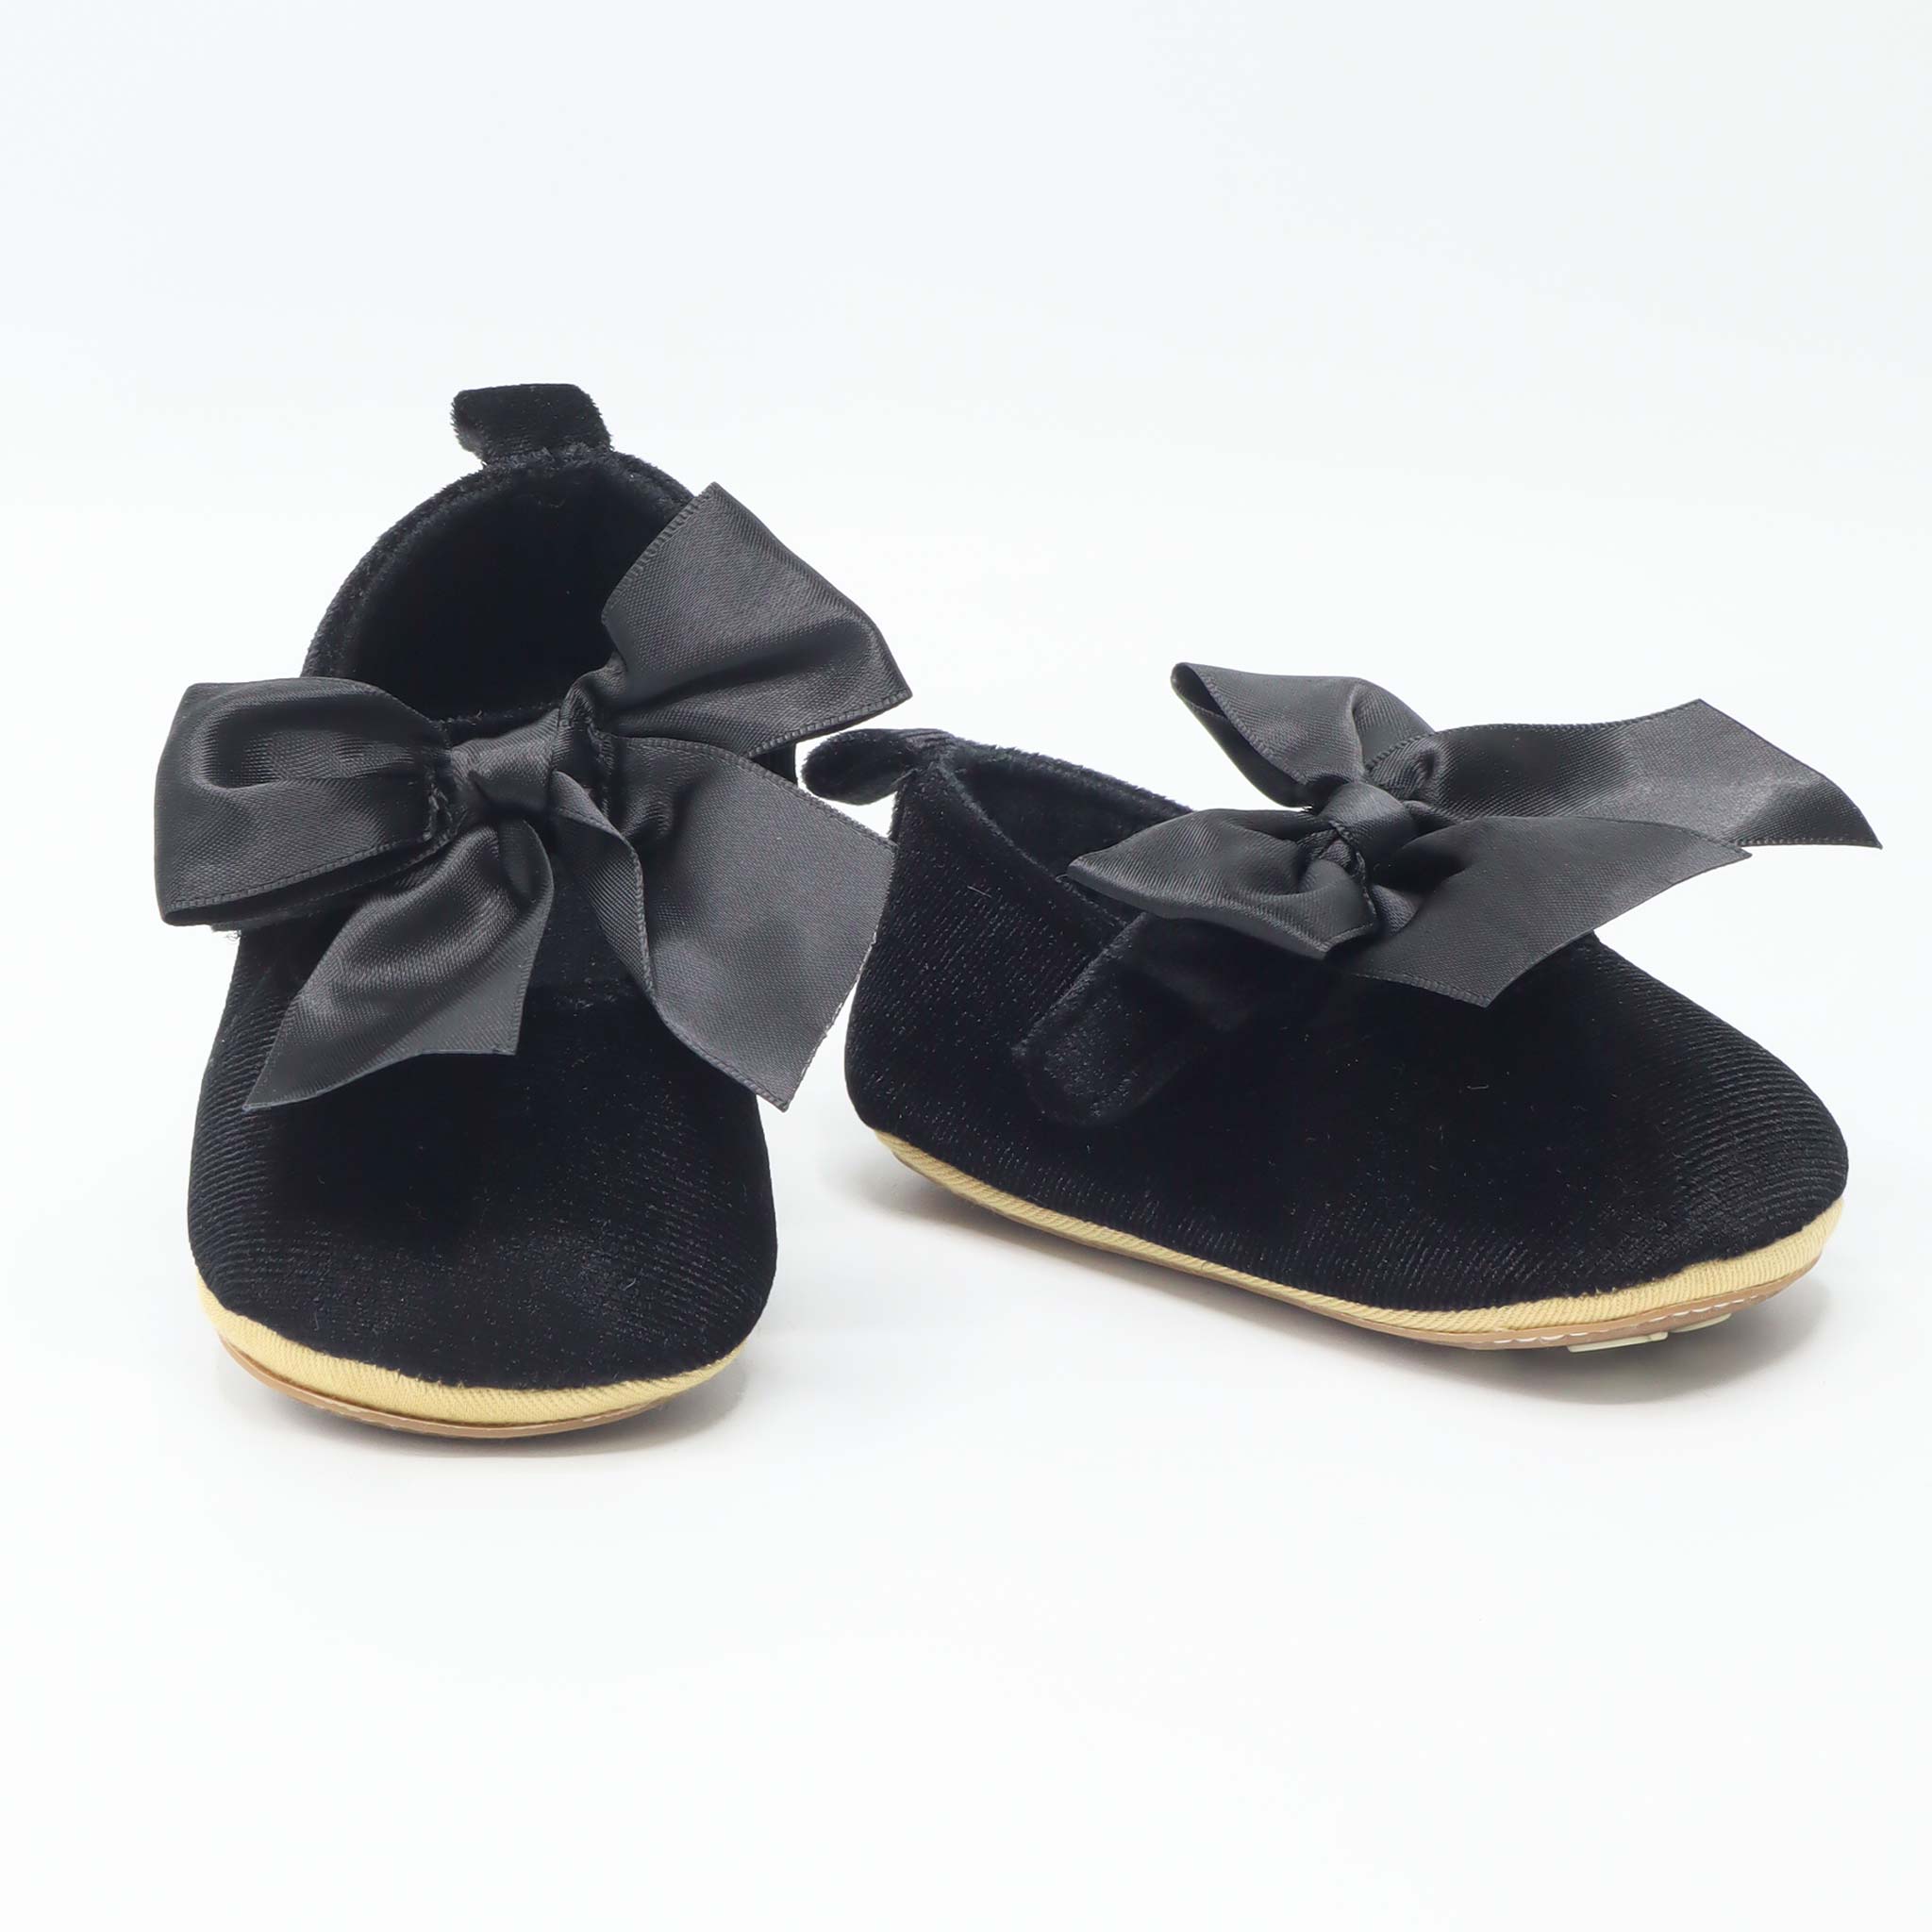 Baby Shoes Black Color with Bow